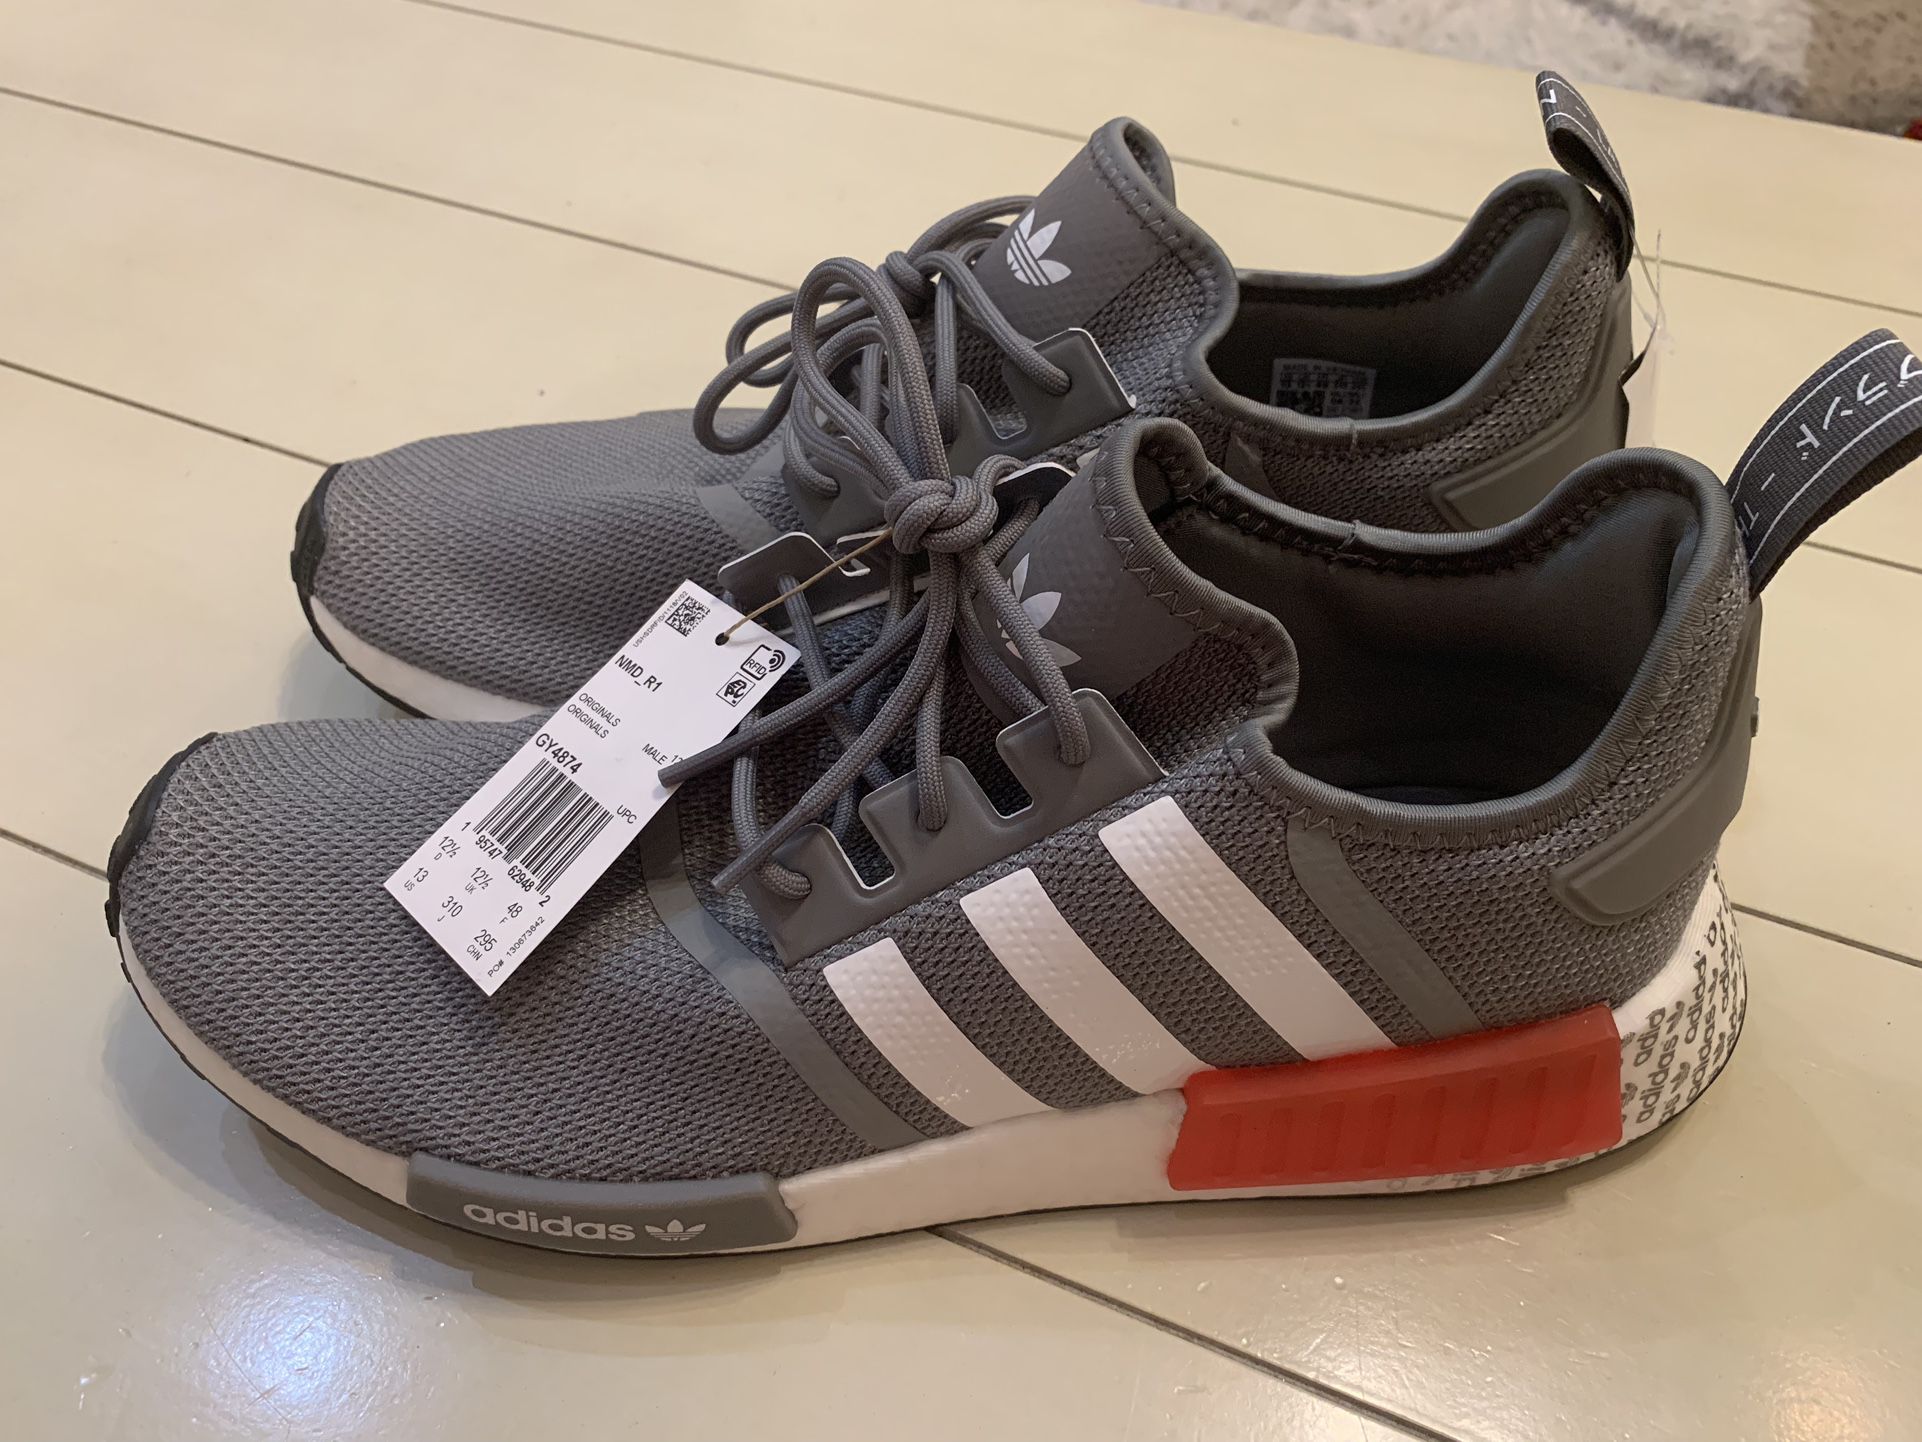 Adidas NMD Mens Sz 13 'Grey Vivid Red' GY4874 for Sale in Kaysville, UT - OfferUp